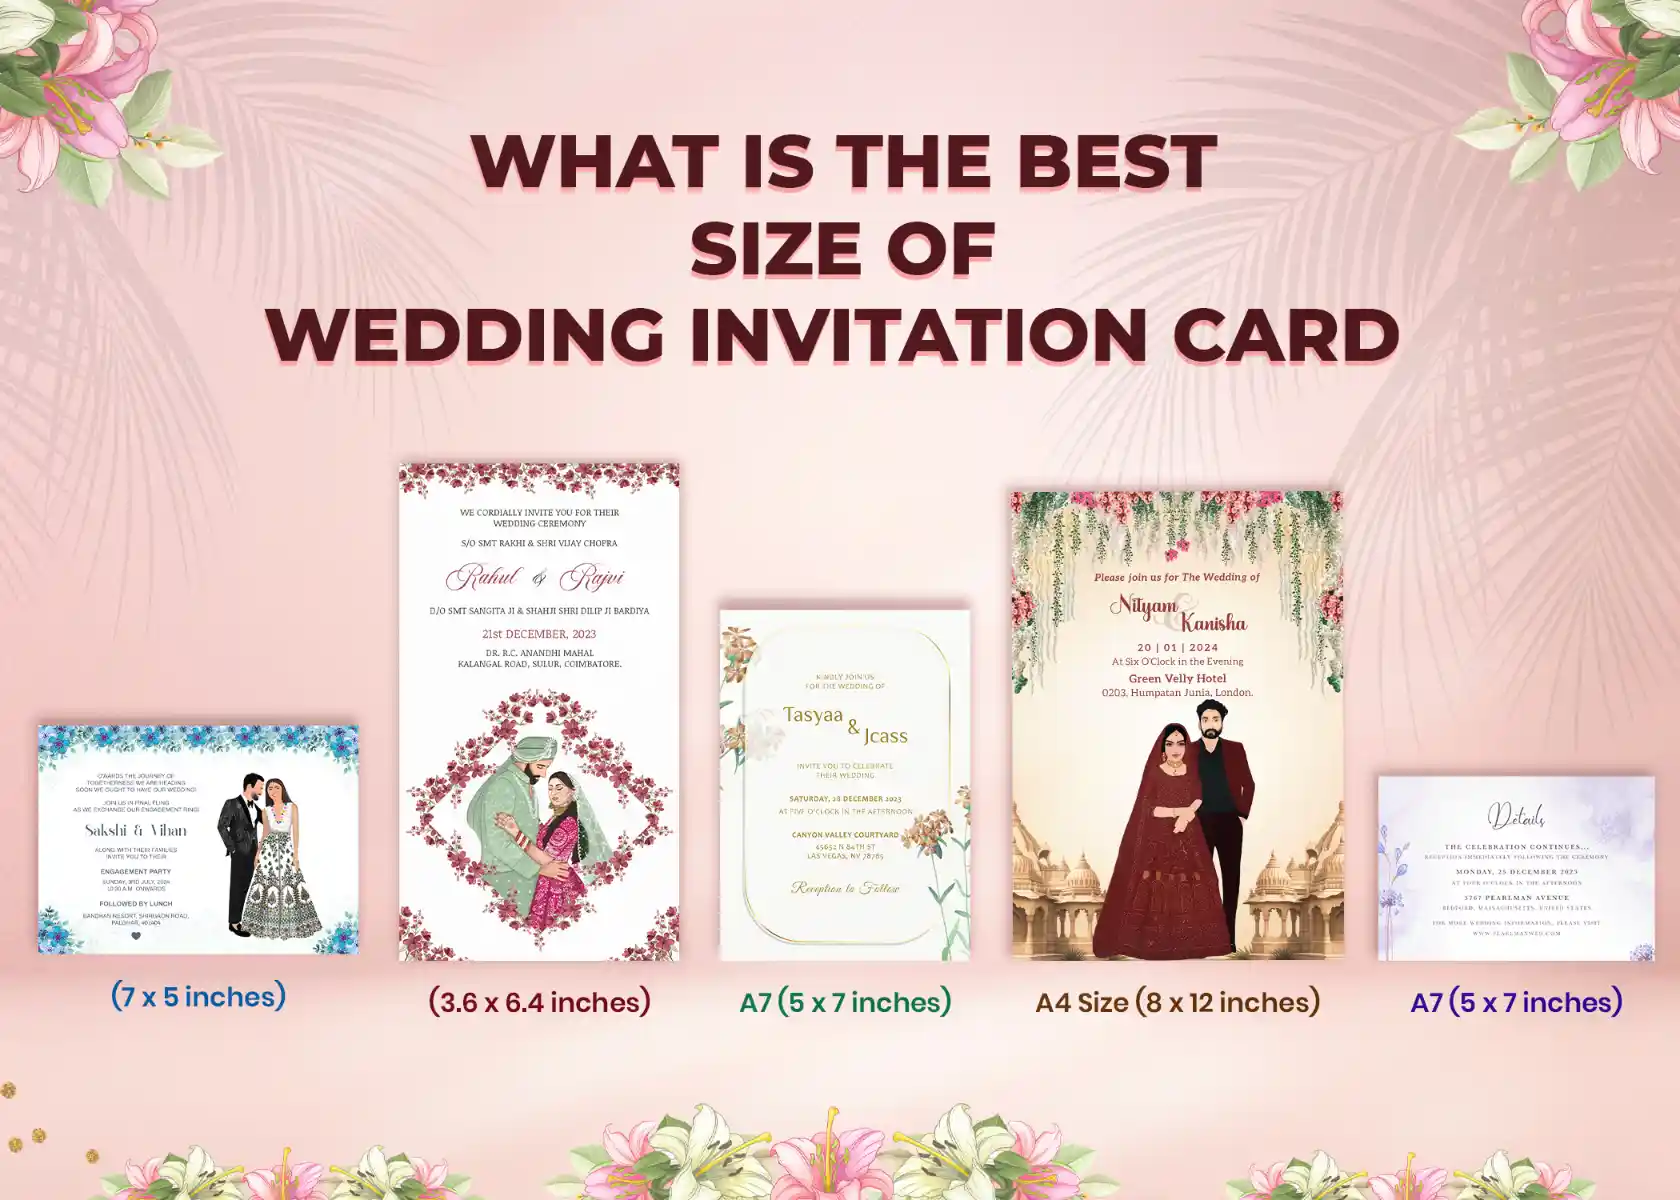 What is the Best Size of Wedding Invitation Card